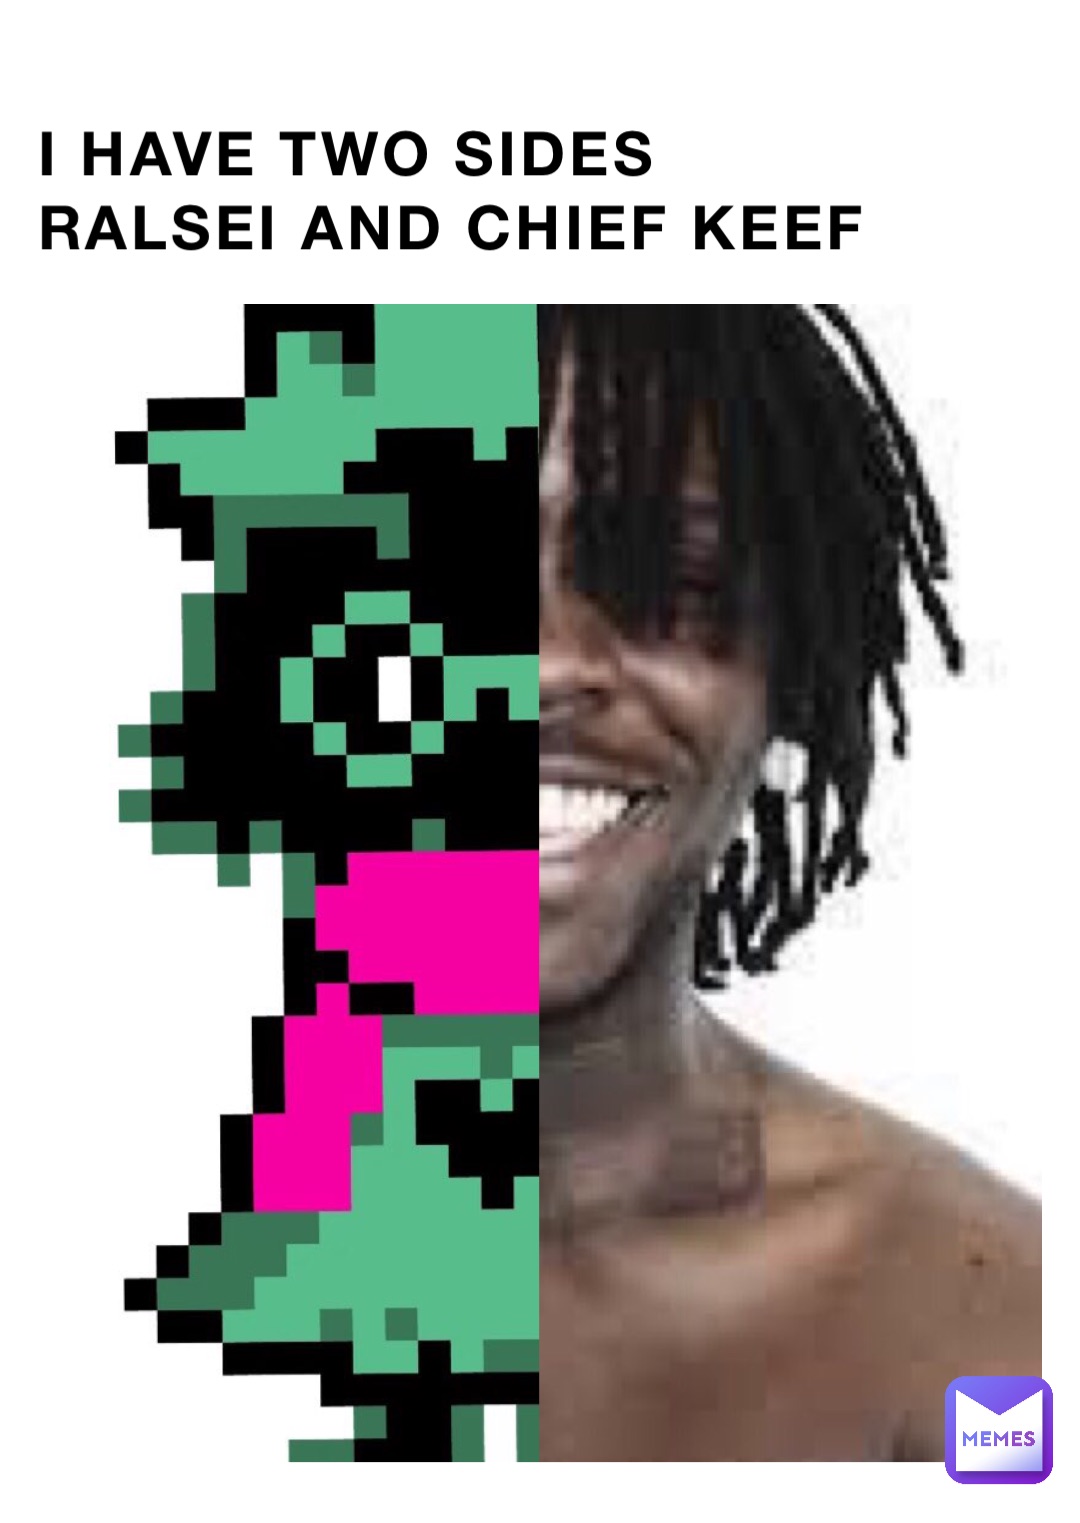 I HAVE TWO SIDES
RALSEI AND CHIEF KEEF